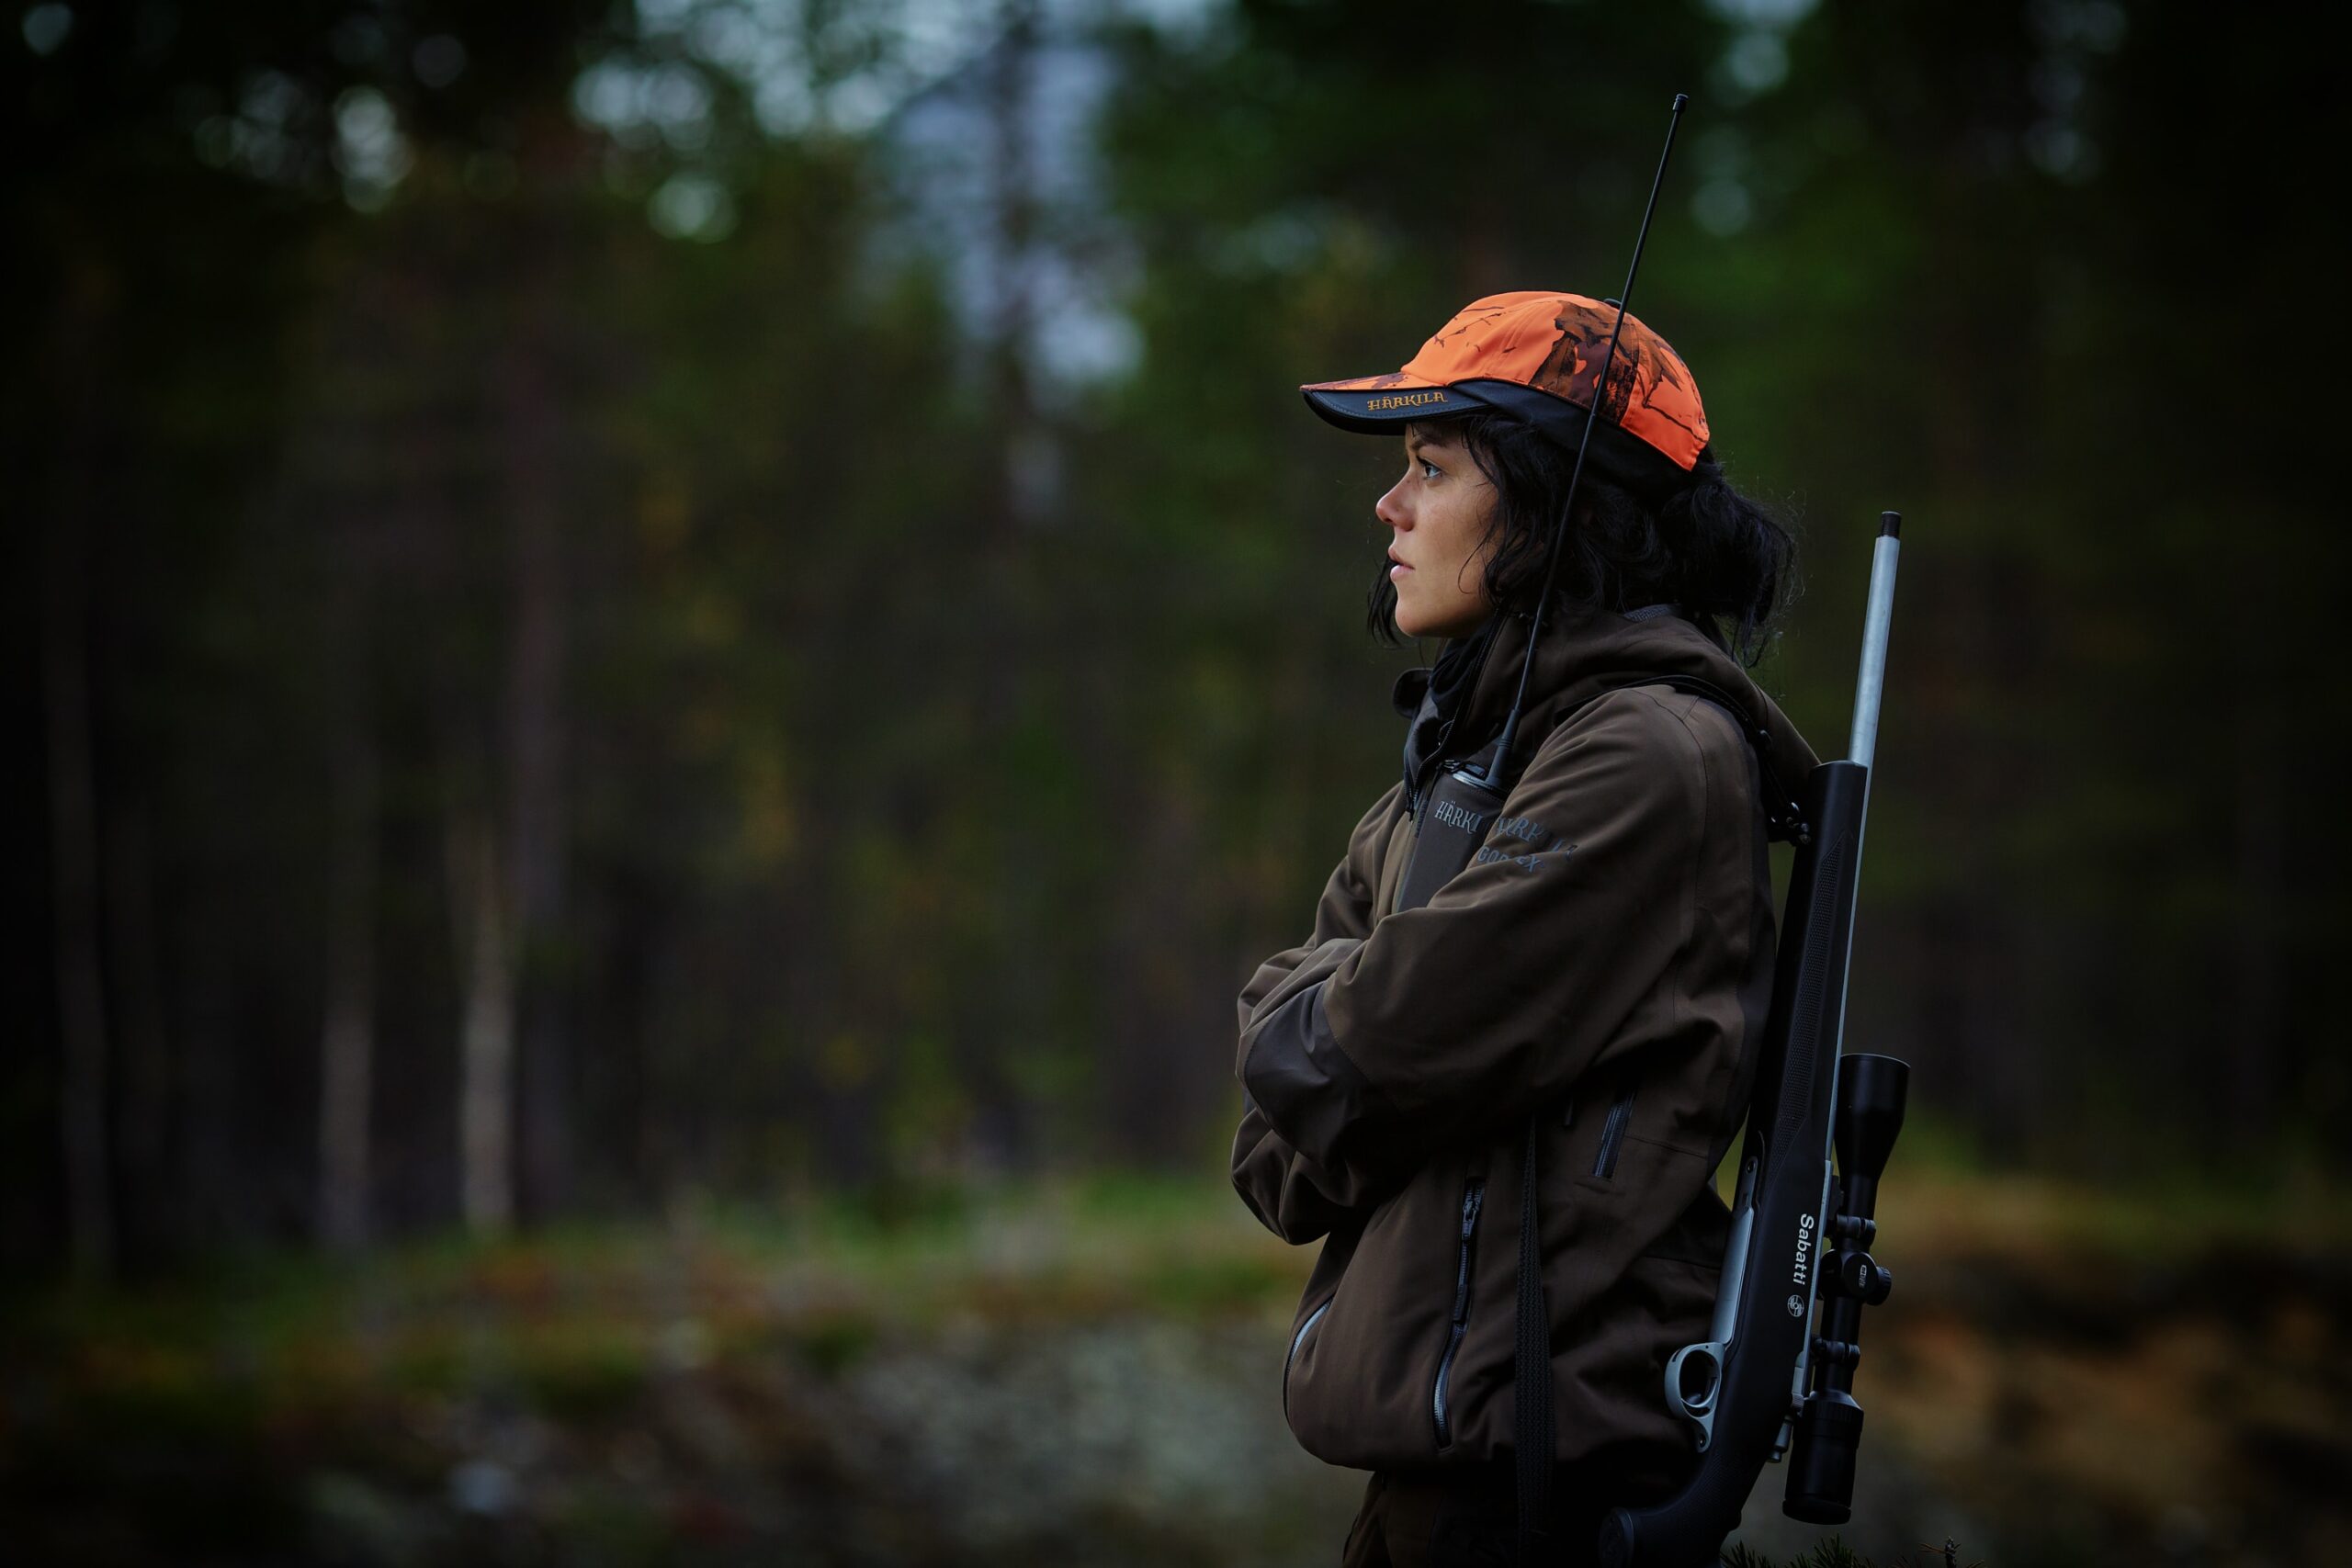 shotgun and firearms applications and renewals medical reports - Shotgun Medicals. Woman in forest hunting